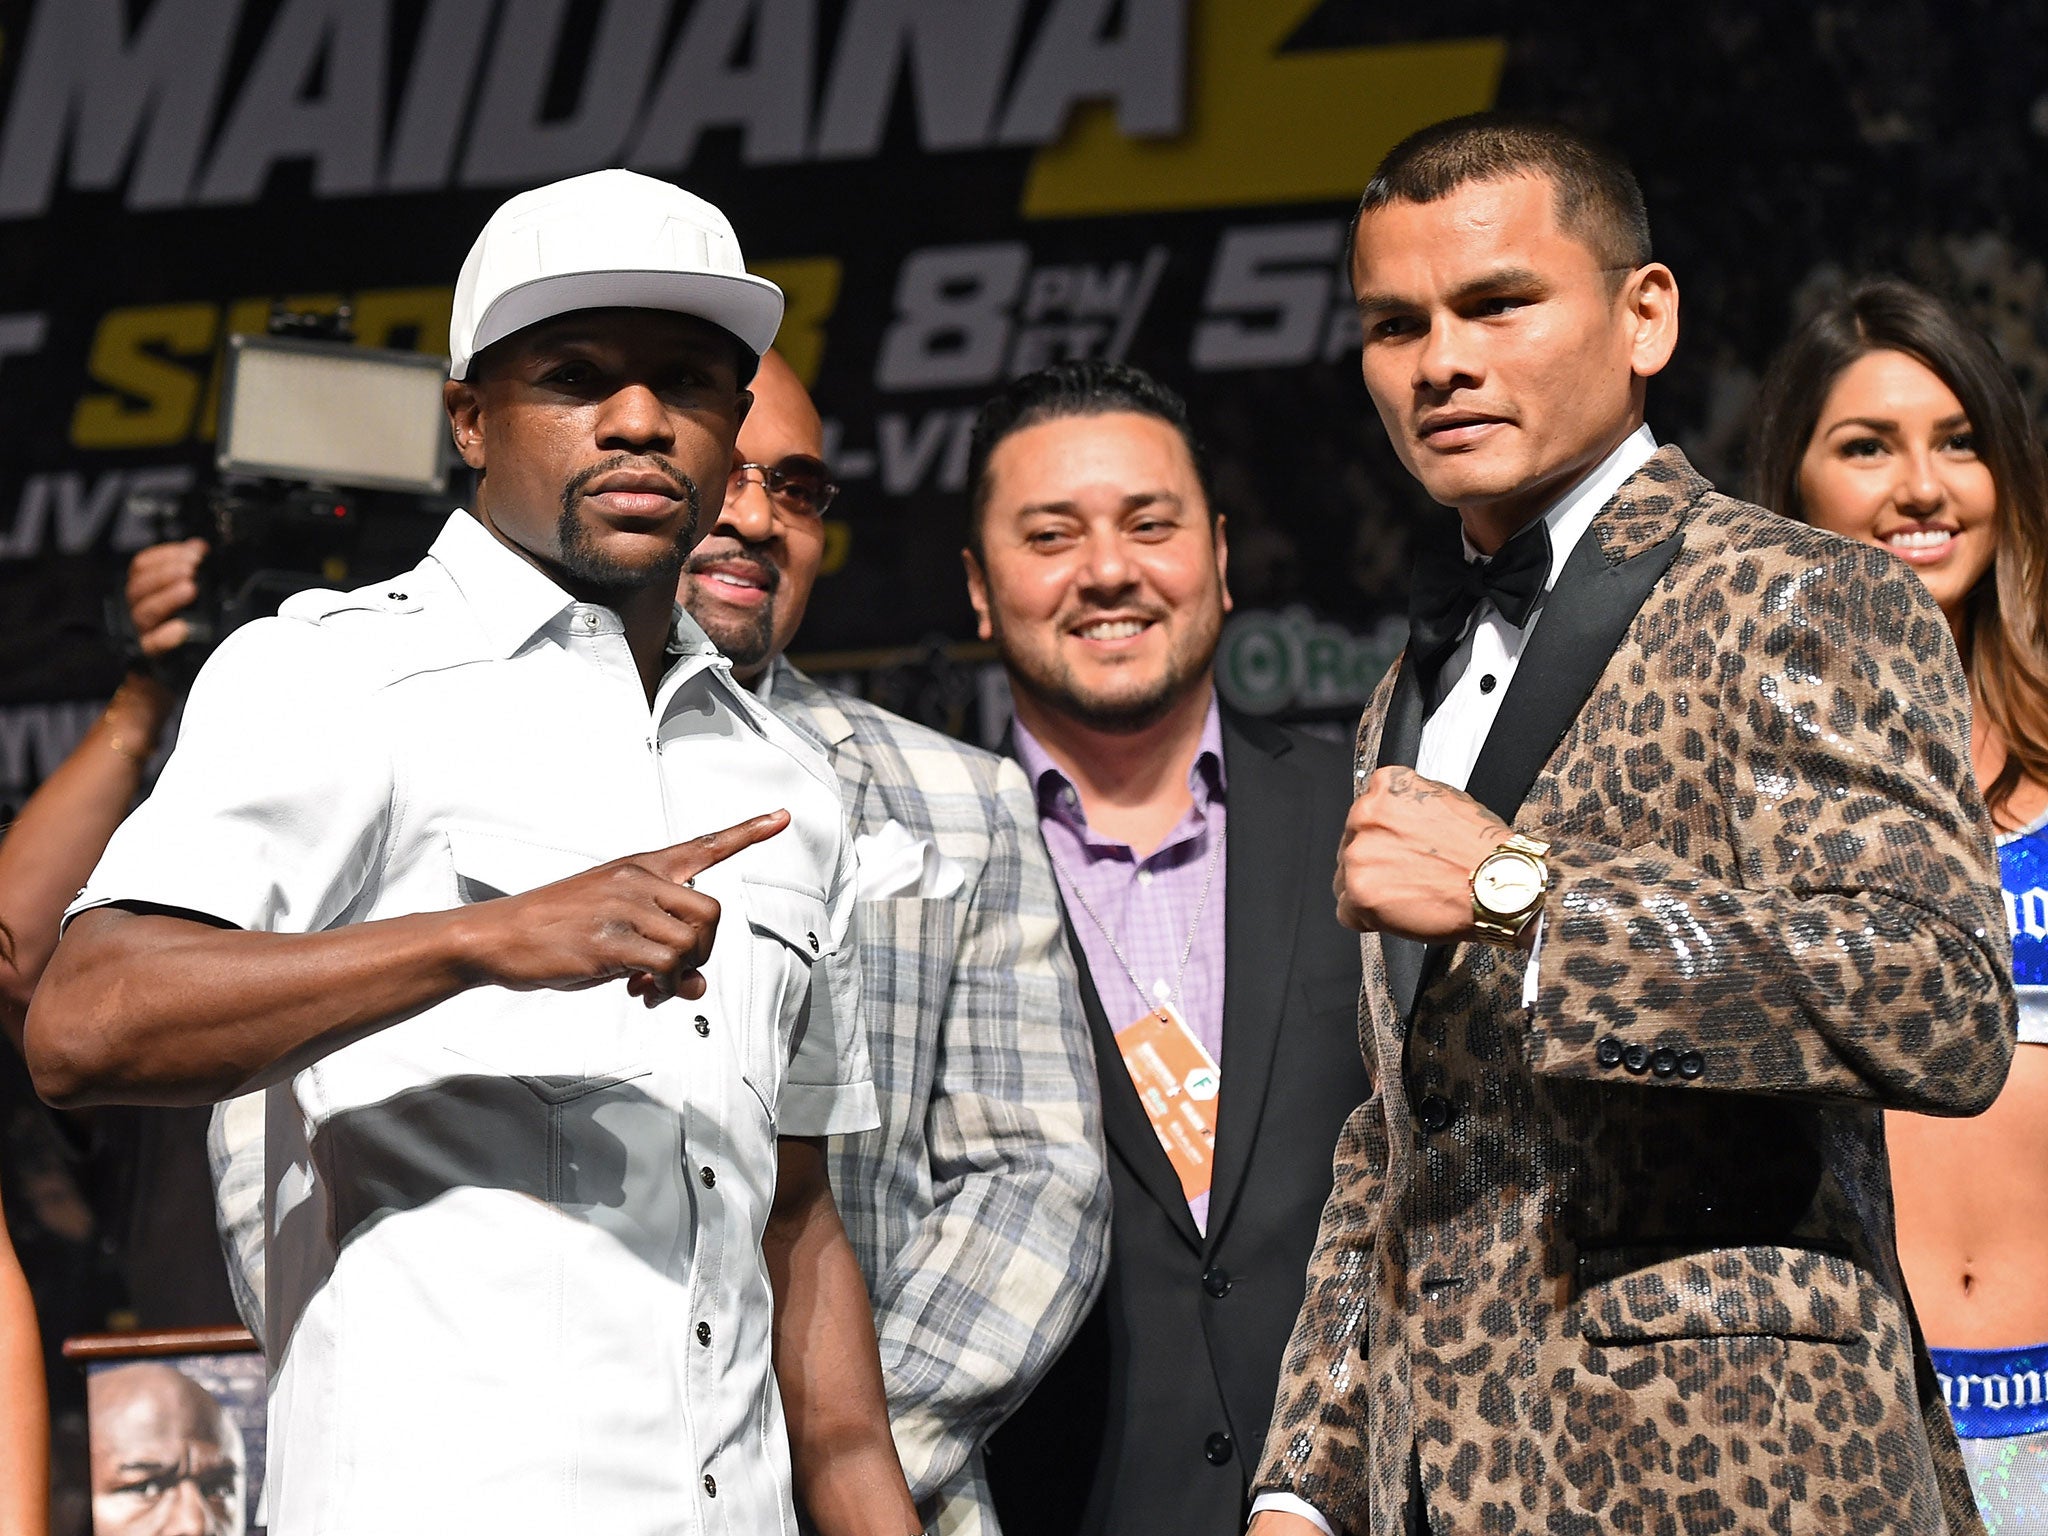 Floyd Mayweather (left) and Marcos Maidana during their press conference this week